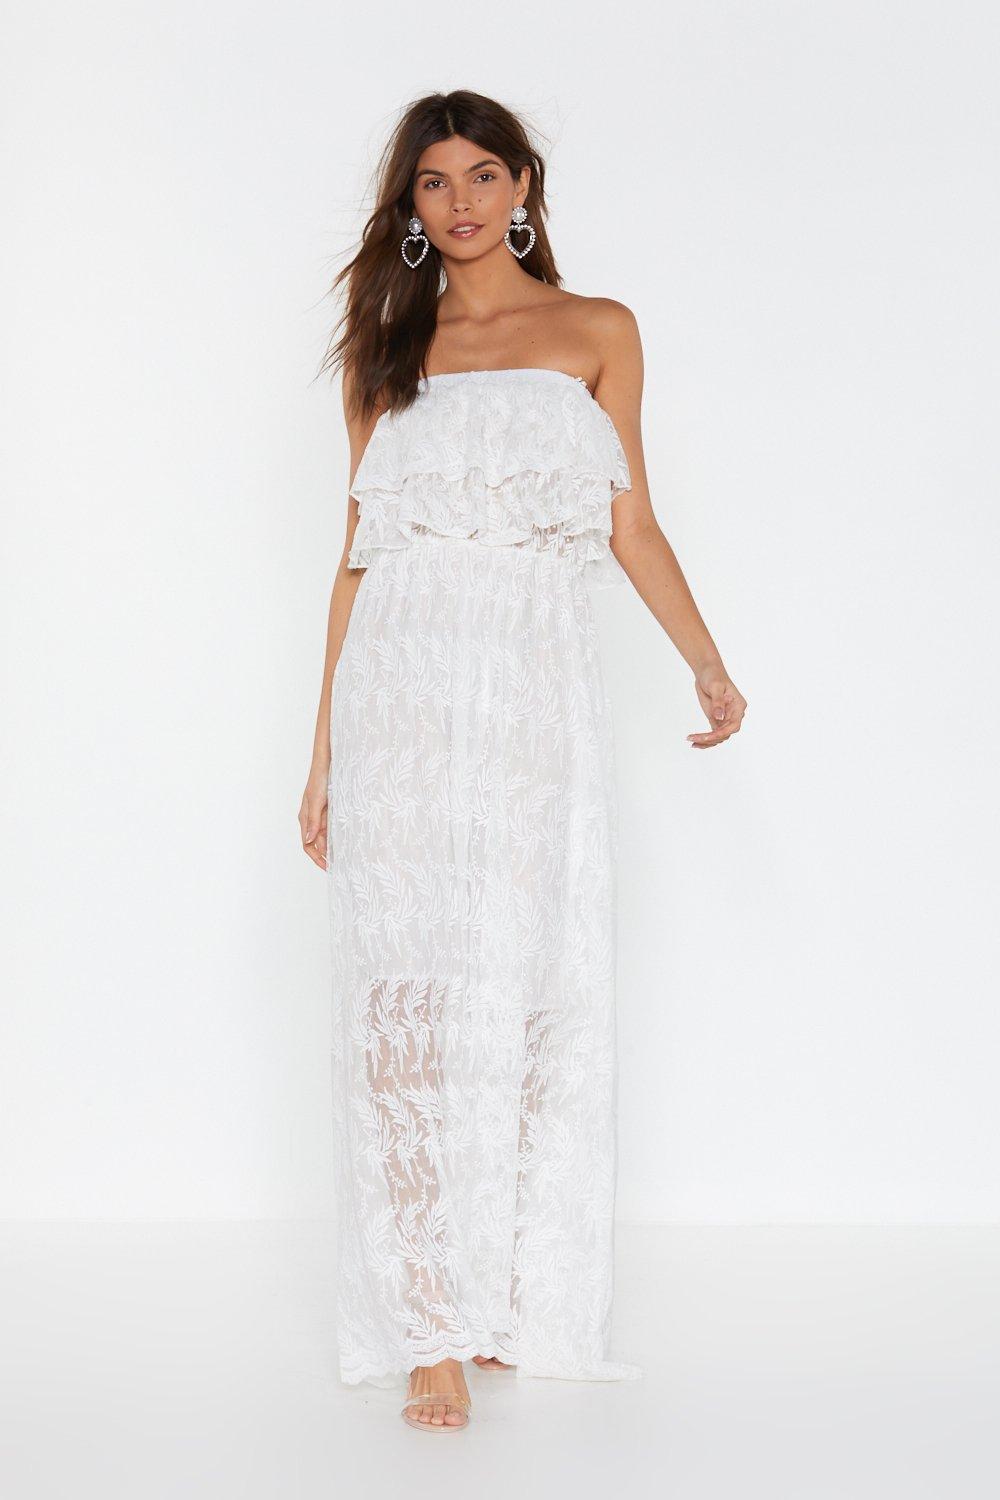 nasty gal in lace of emergency